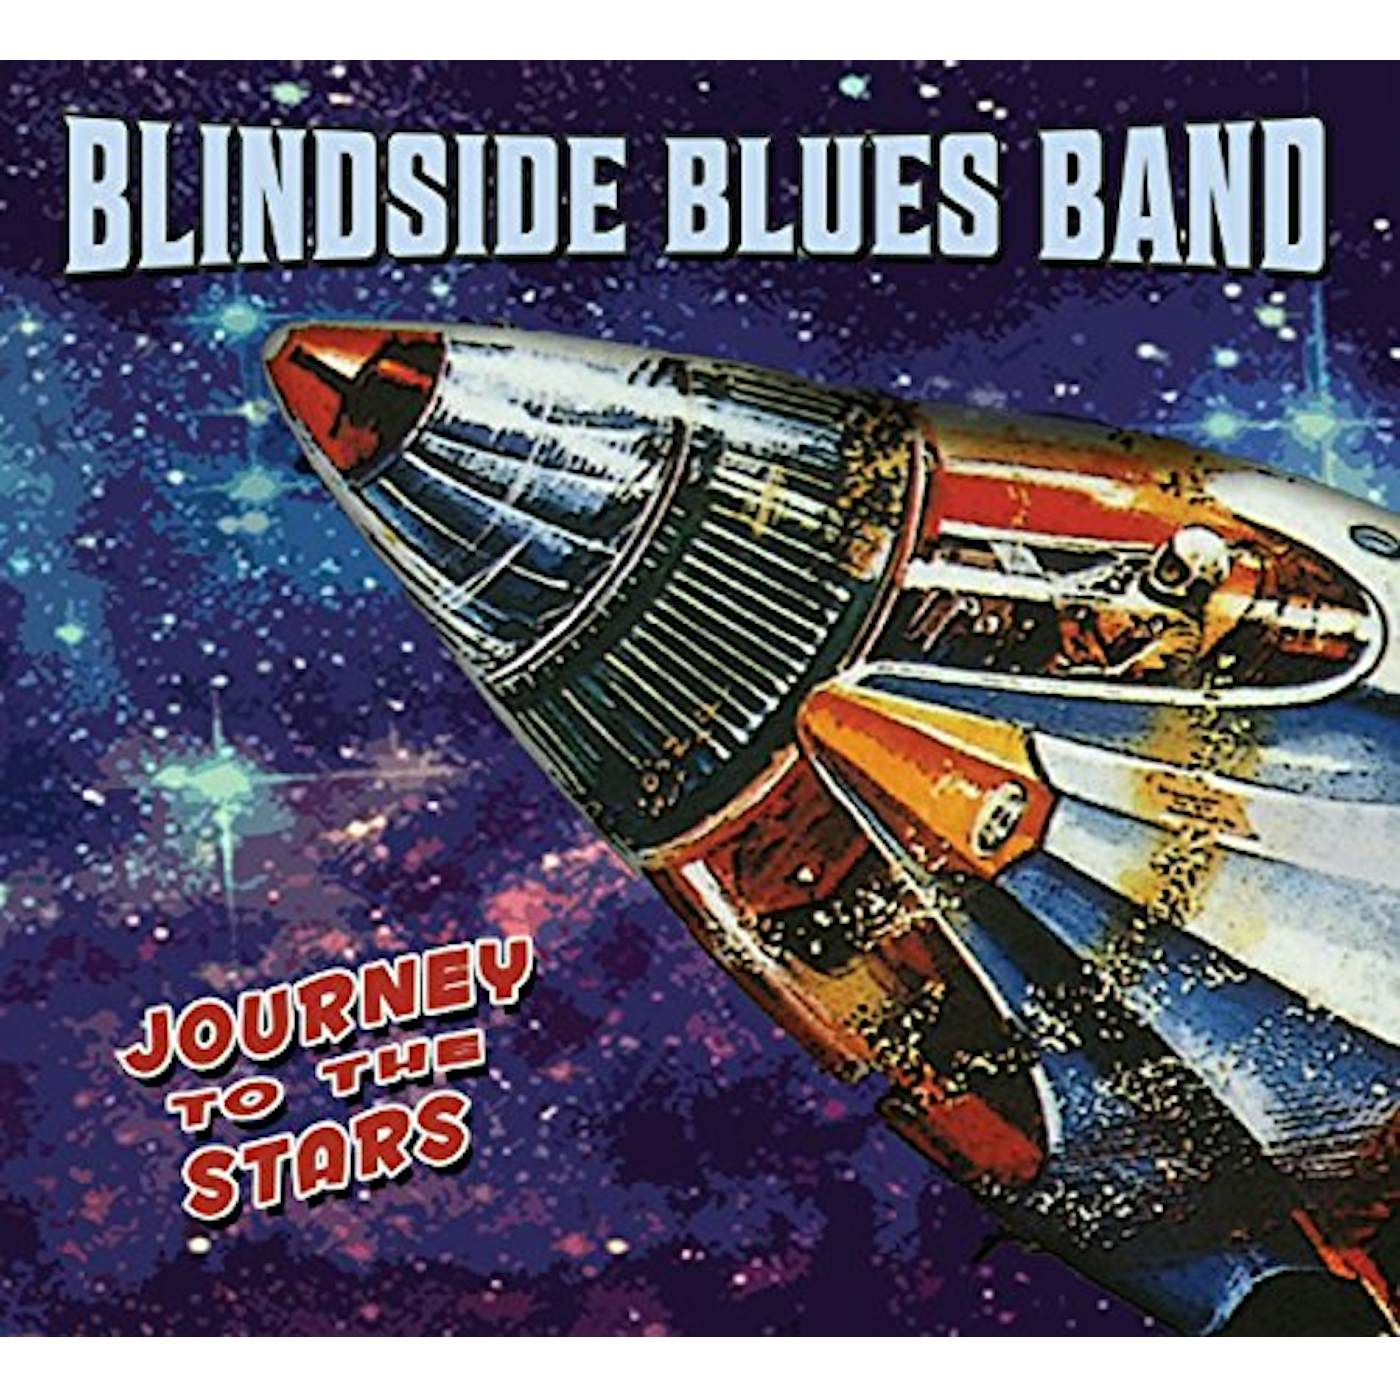 Blindside Blues Band JOURNEY TO THE STARS CD